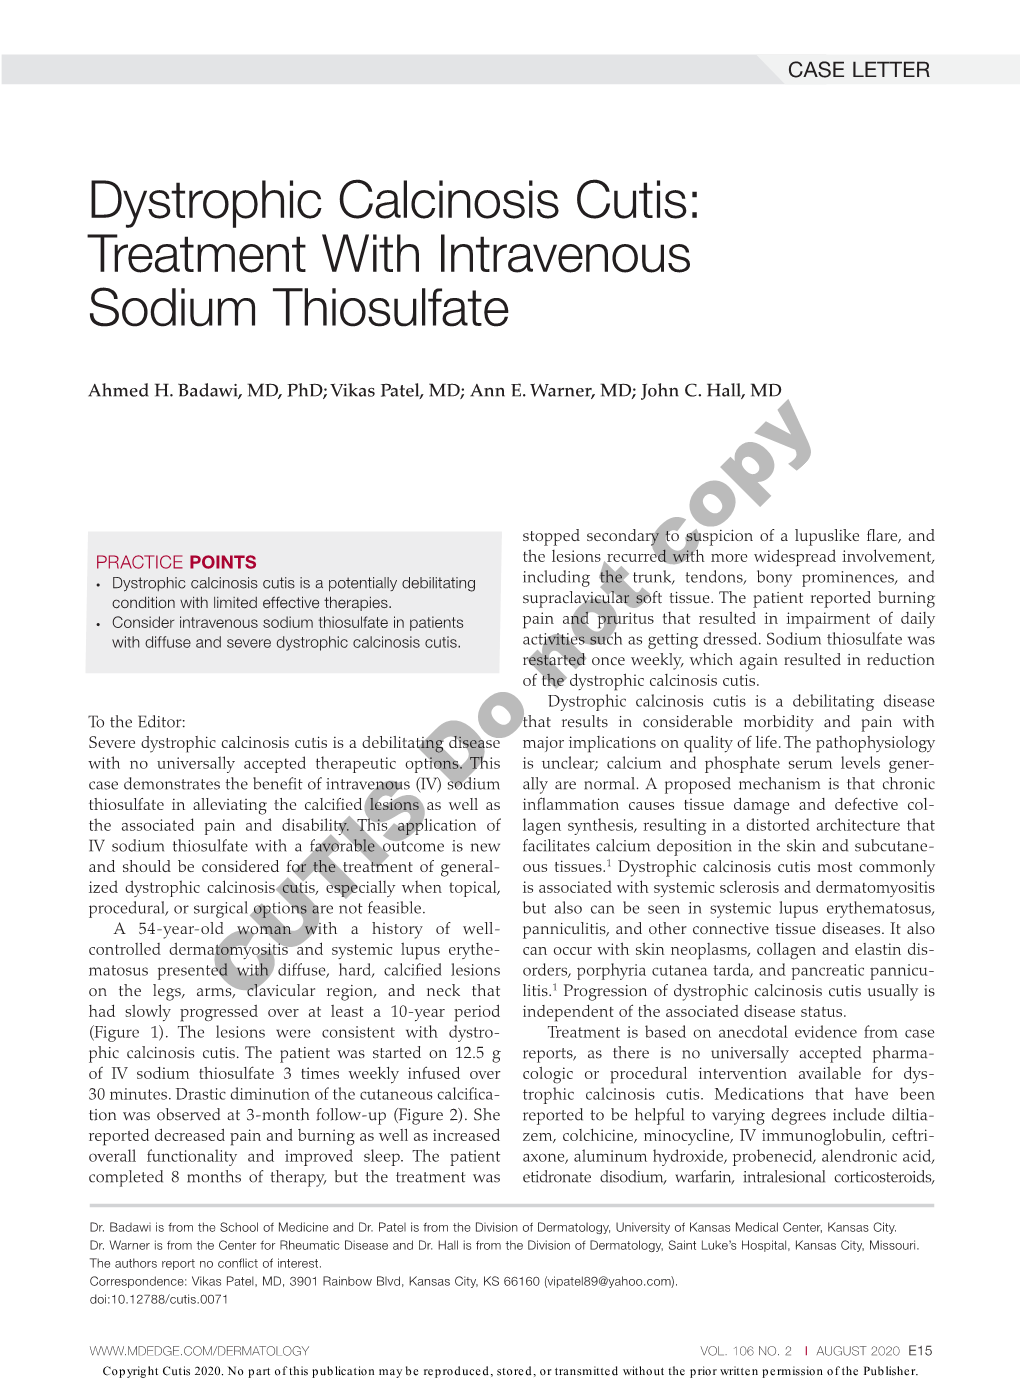 Dystrophic Calcinosis Cutis: Treatment with Intravenous Sodium Thiosulfate